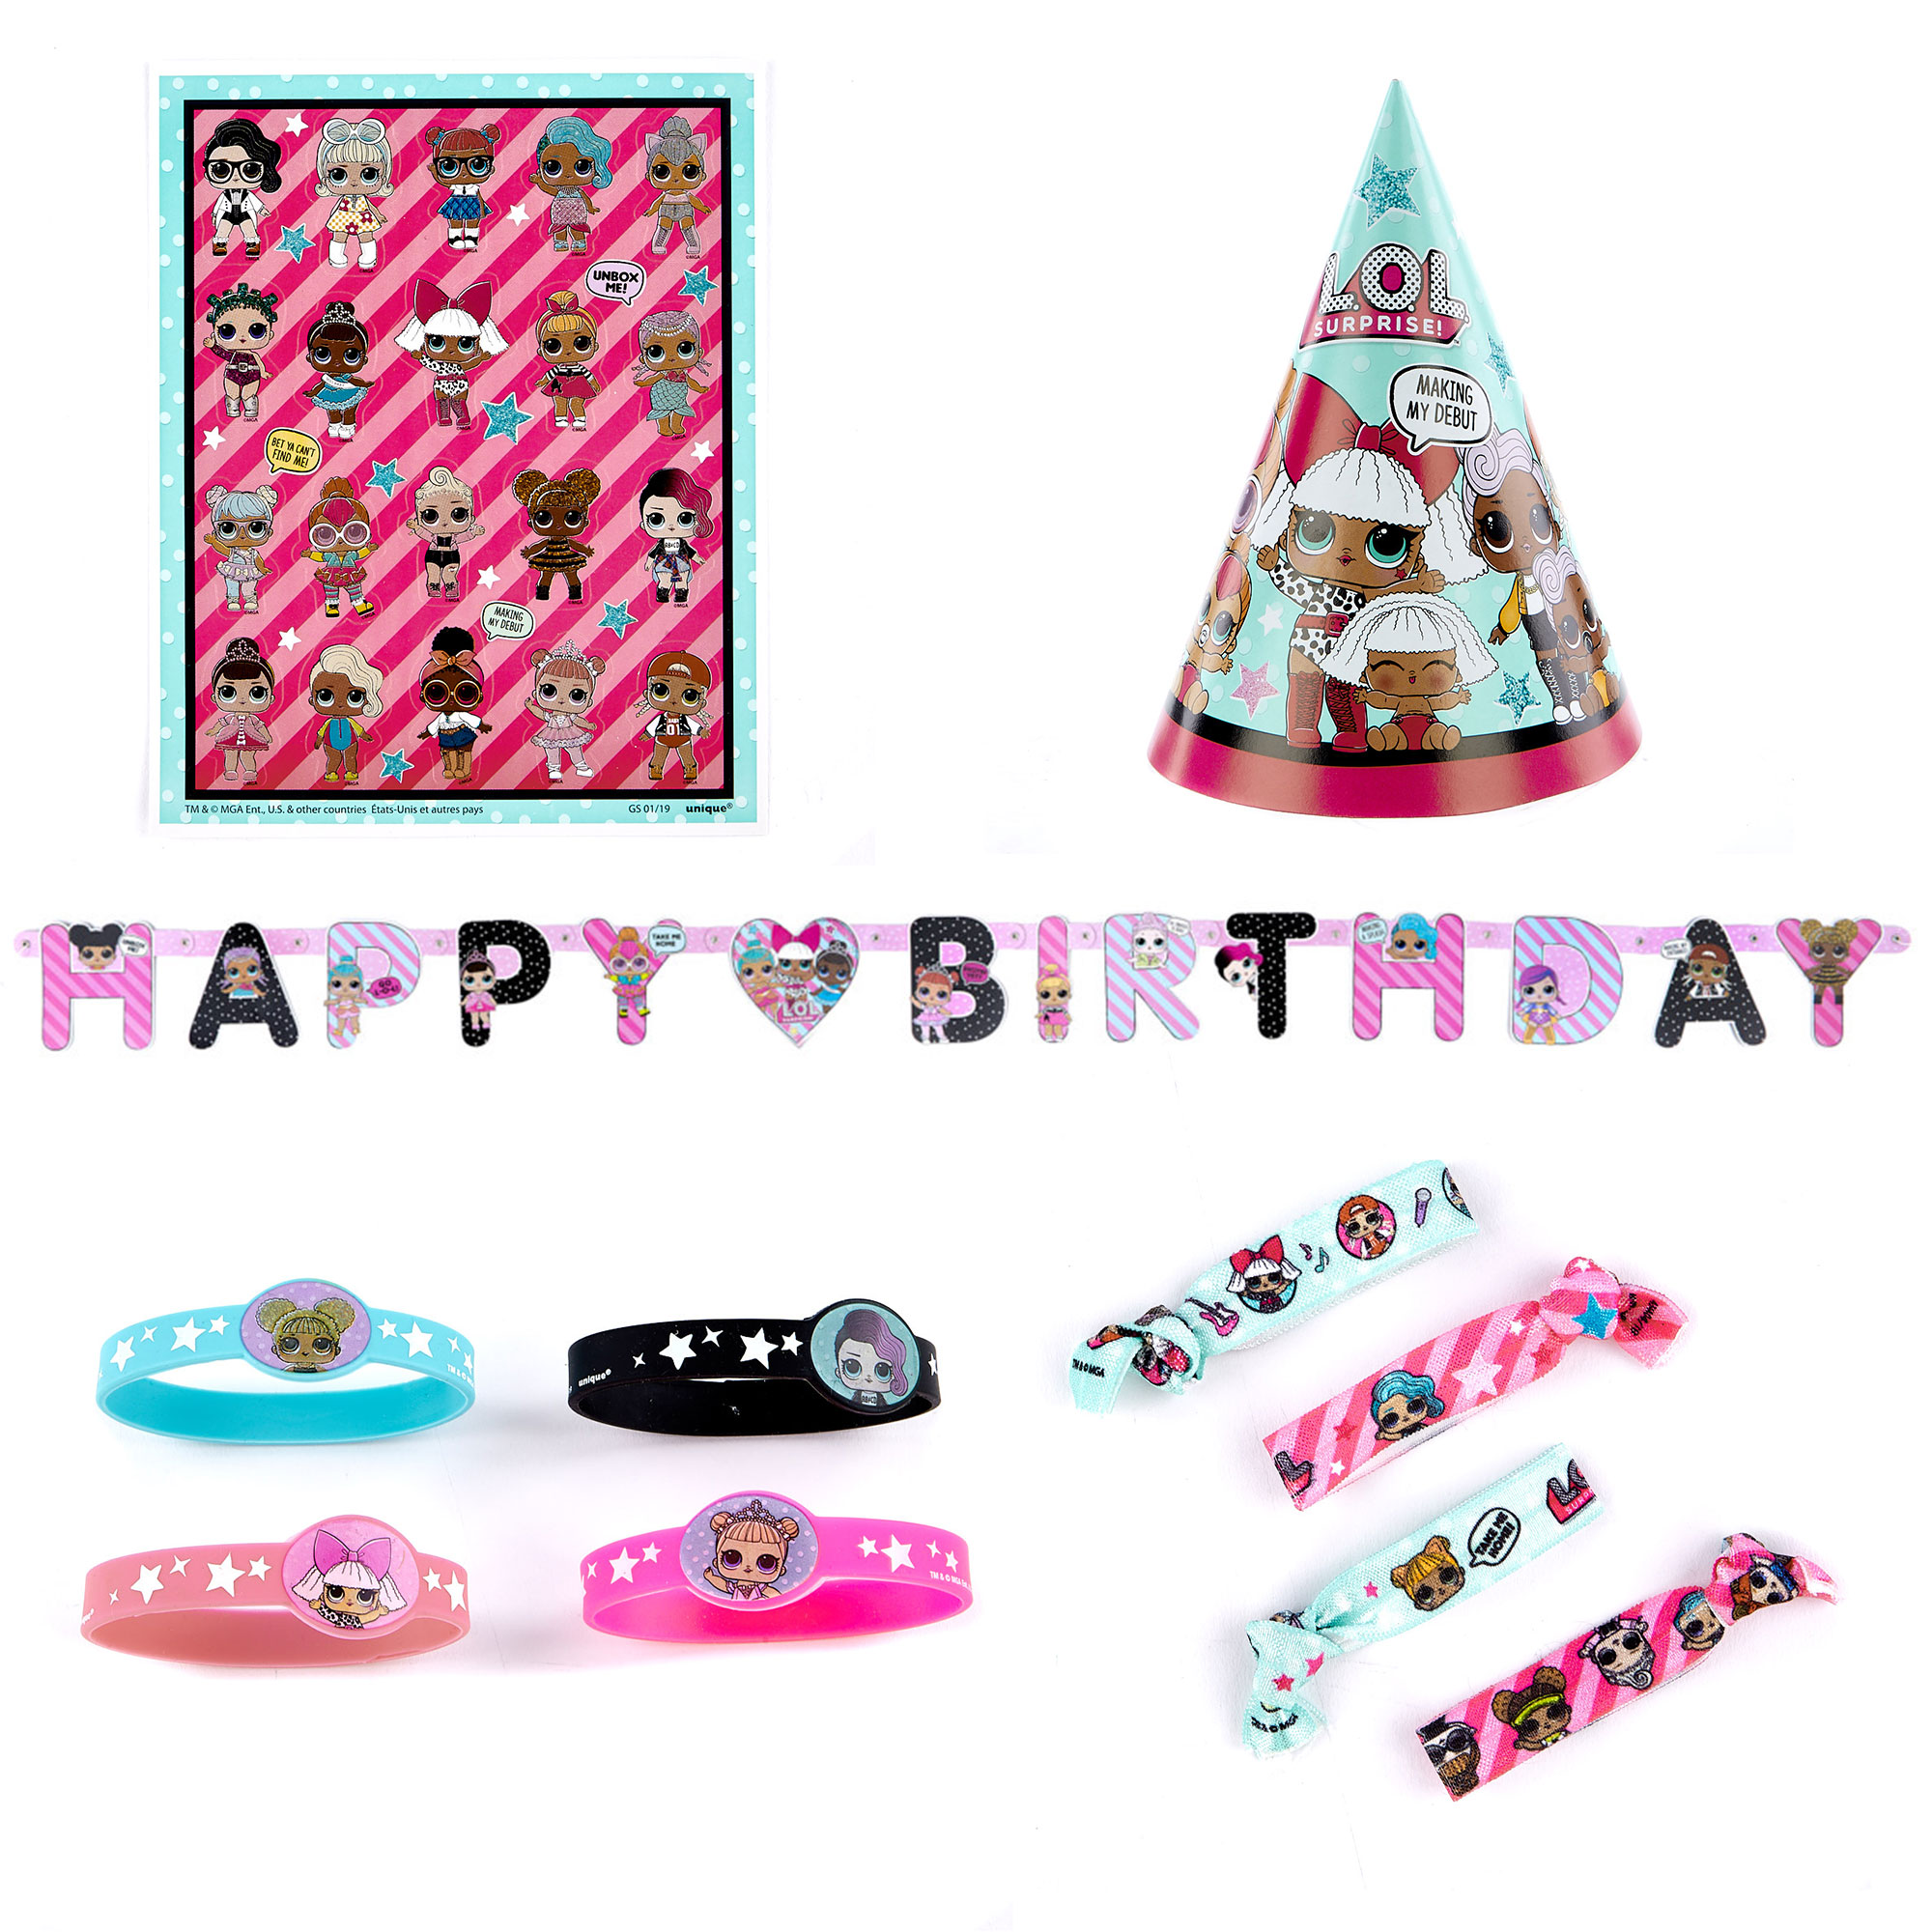 L.O.L. Surprise! Birthday Party Accessories Kit - 49 Pieces